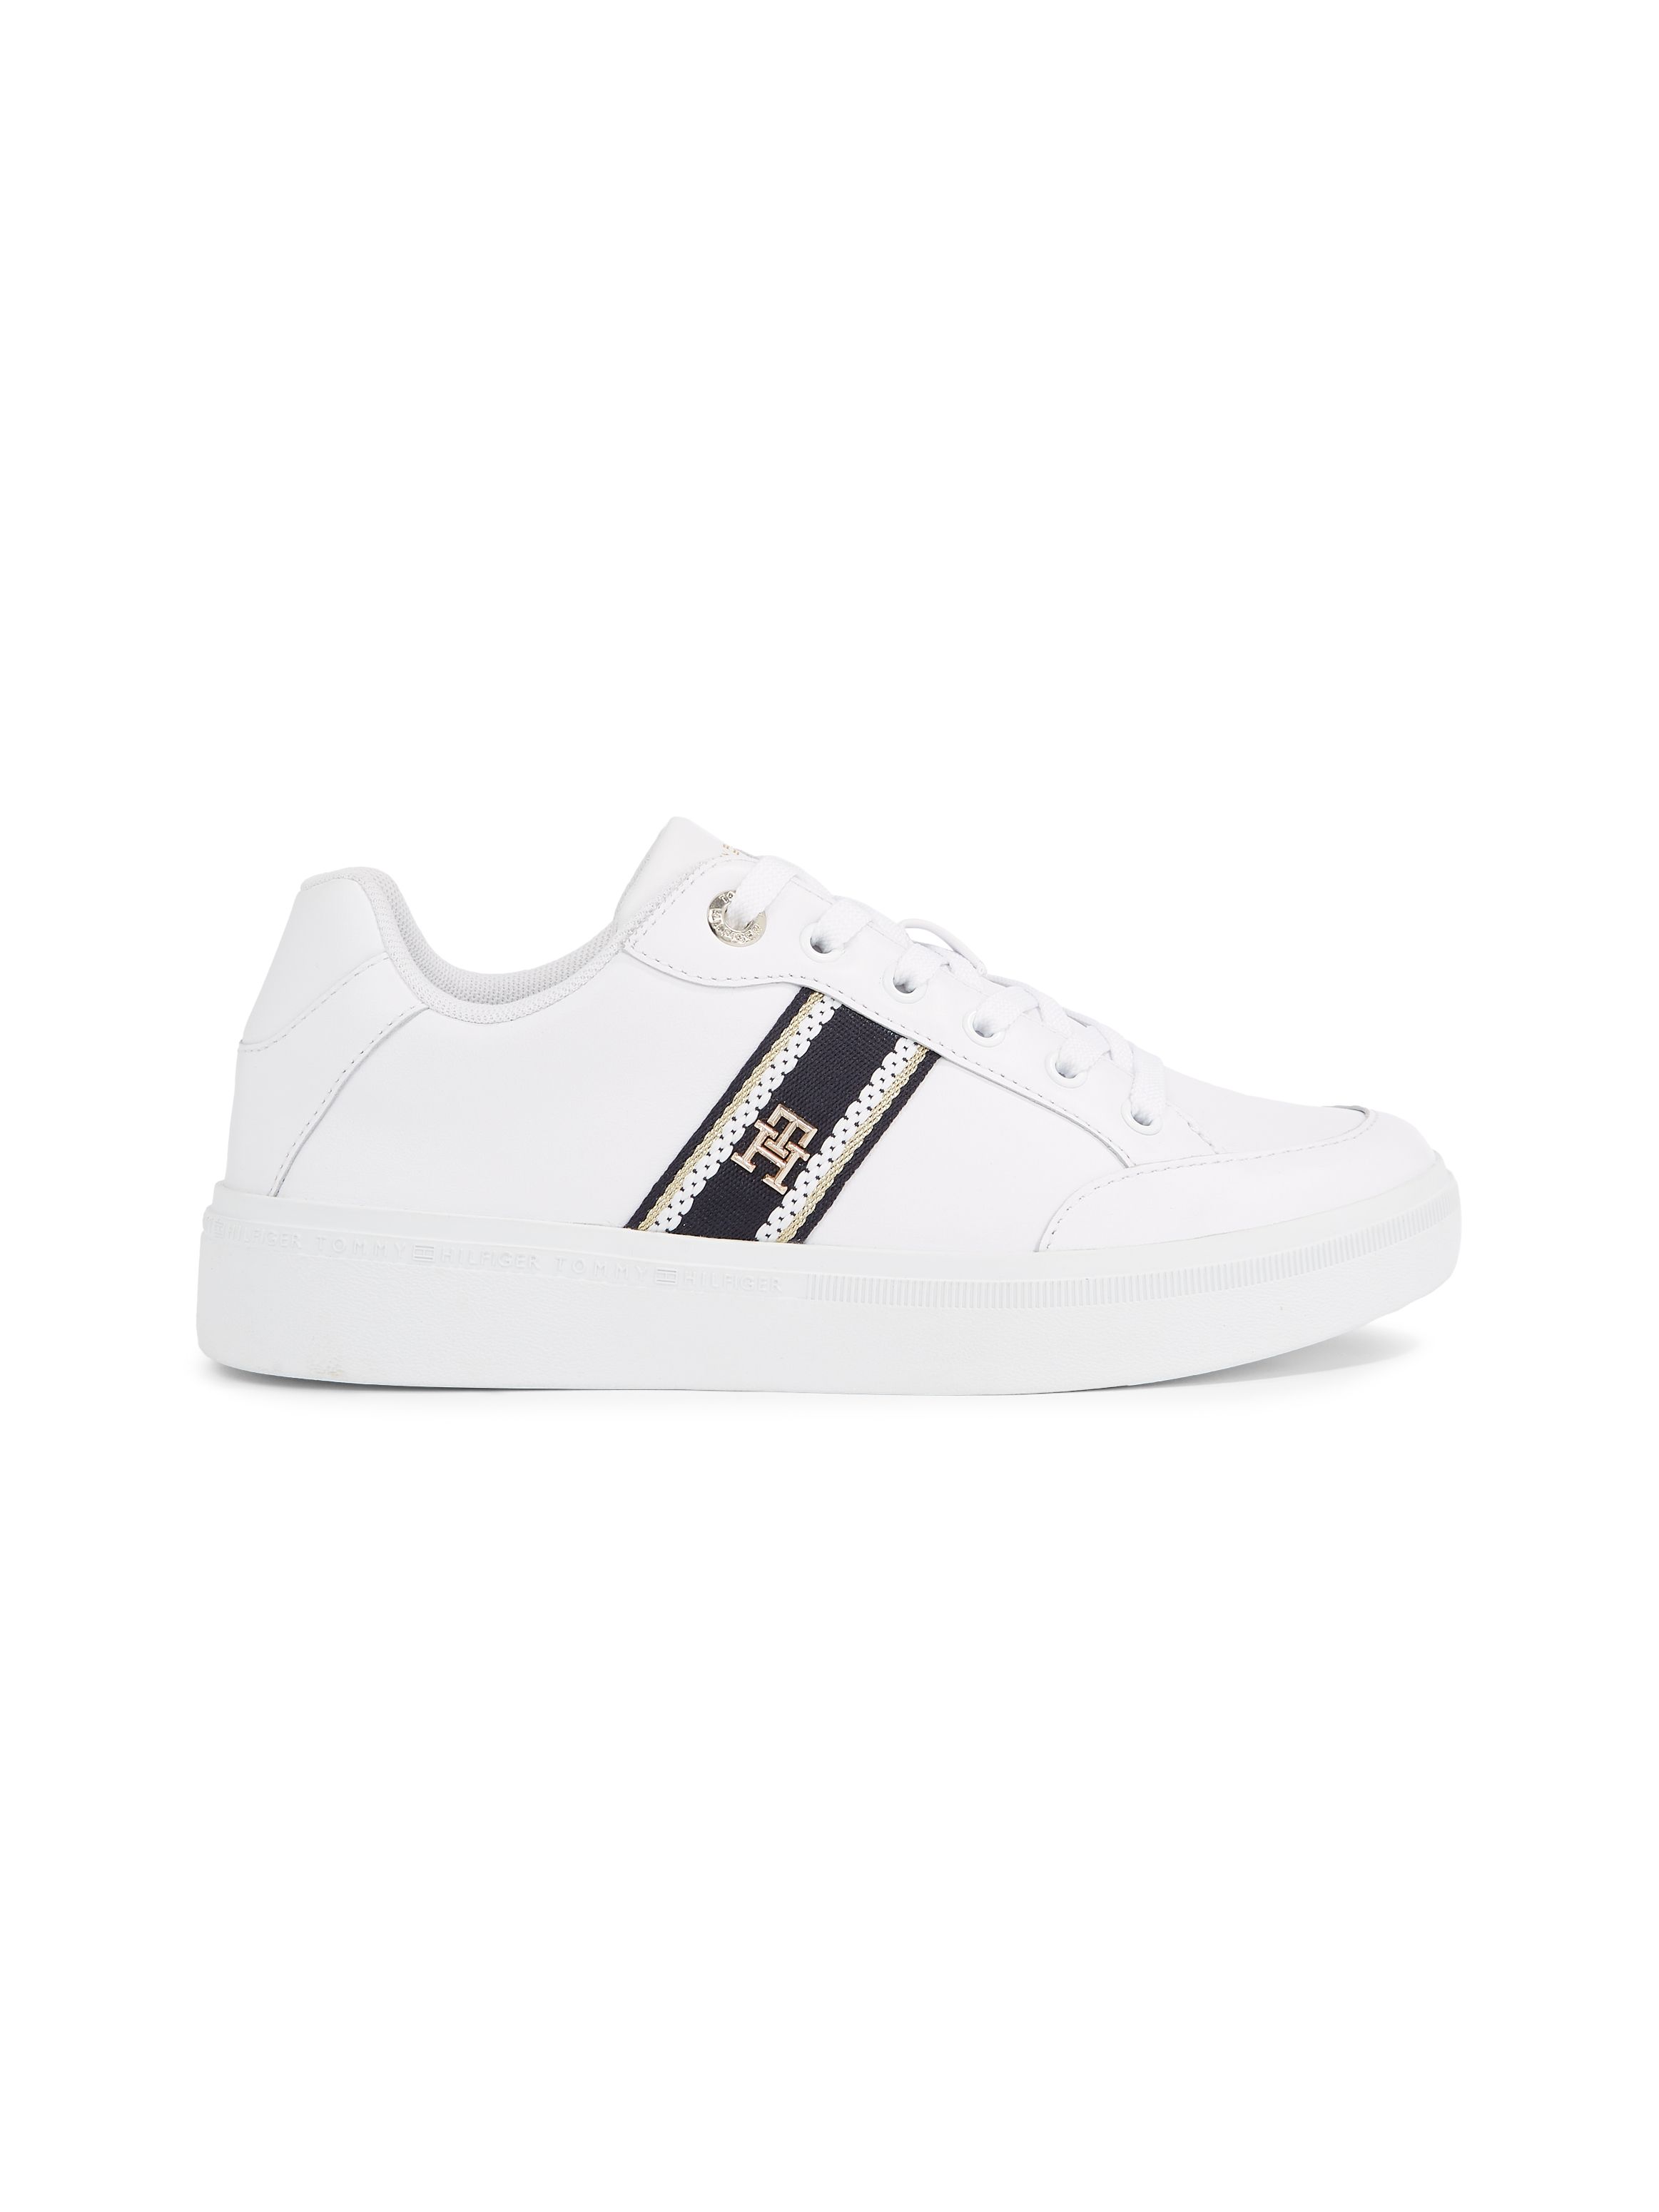 Tommy Hilfiger Women's Webbing Leather Court Trainers